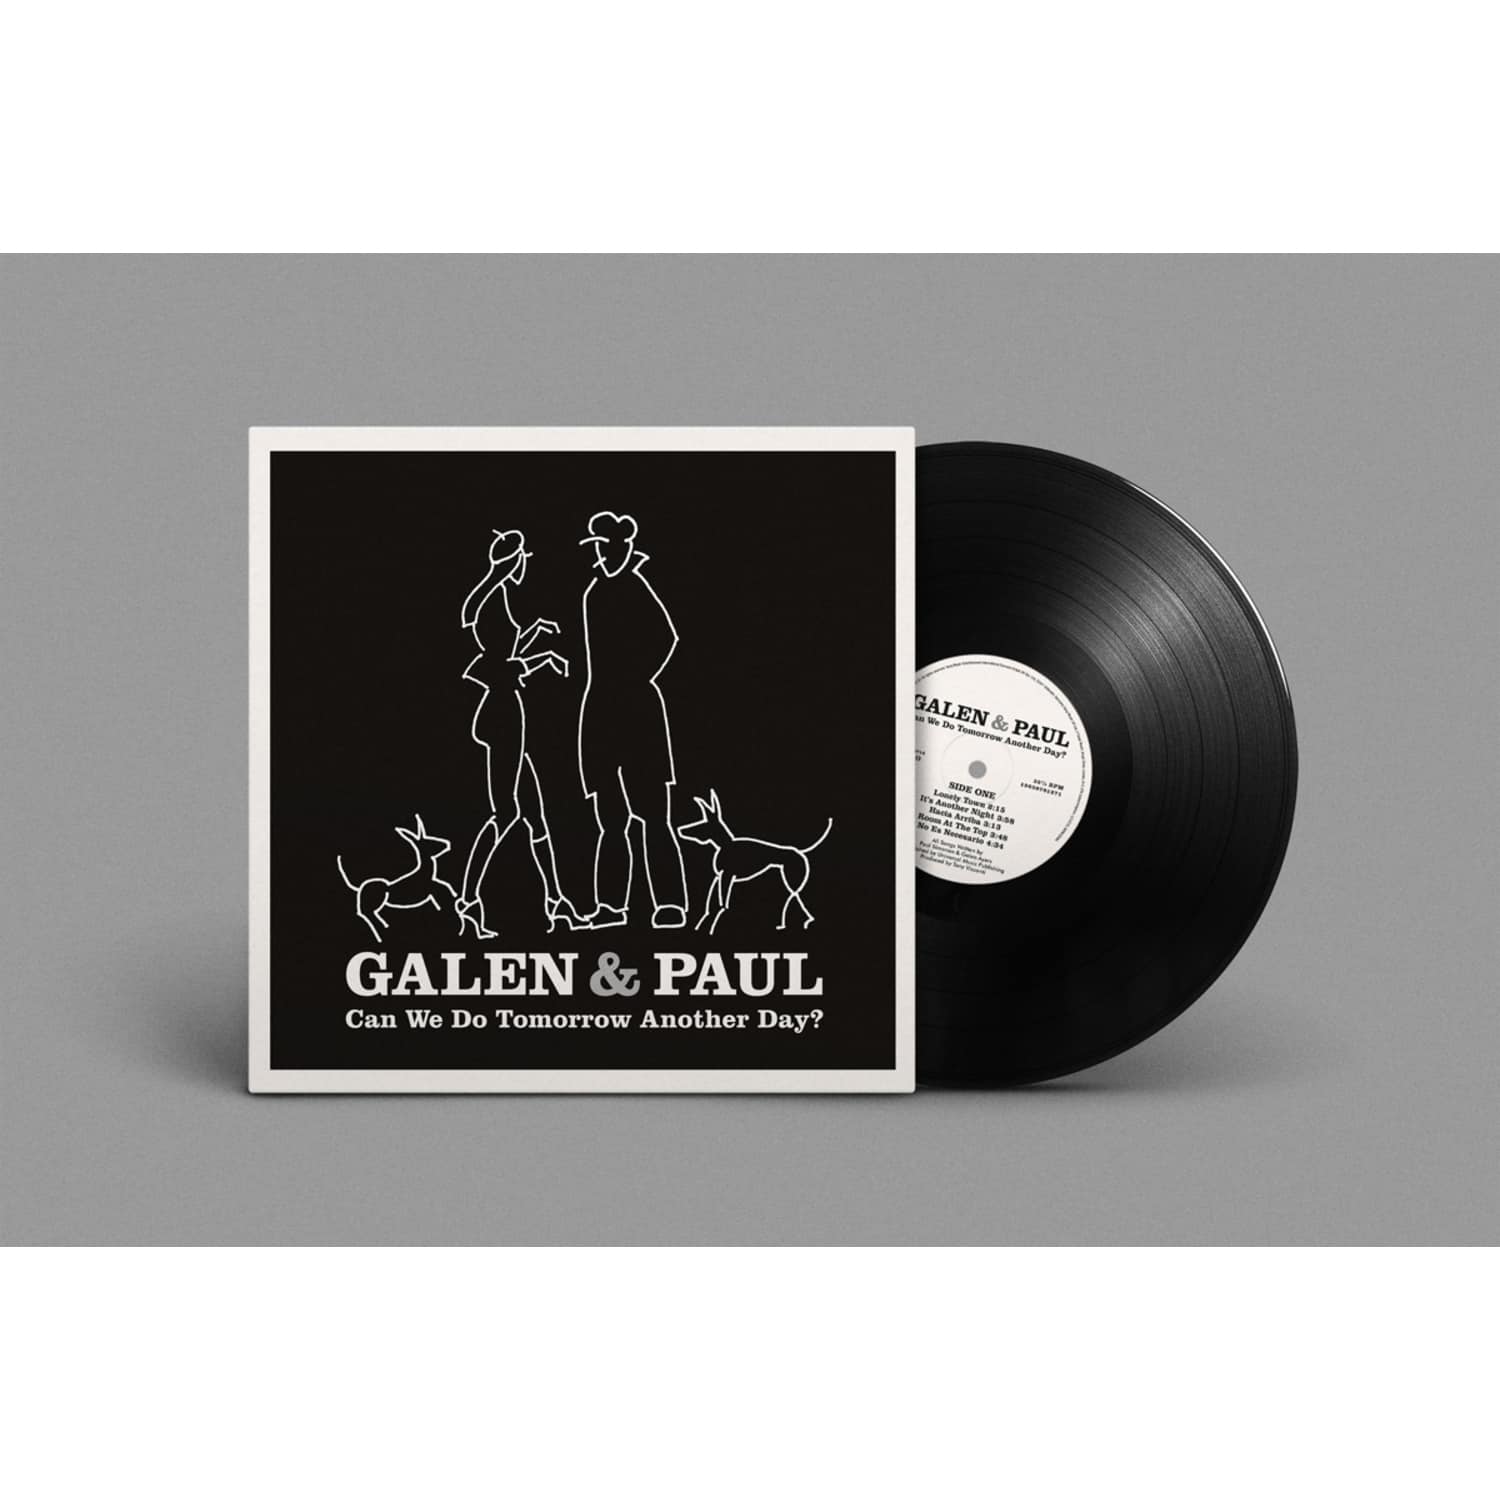 Galen & Paul, Galen Ayers, Paul Simonon - CAN WE DO TOMORROW ANOTHER DAY? 